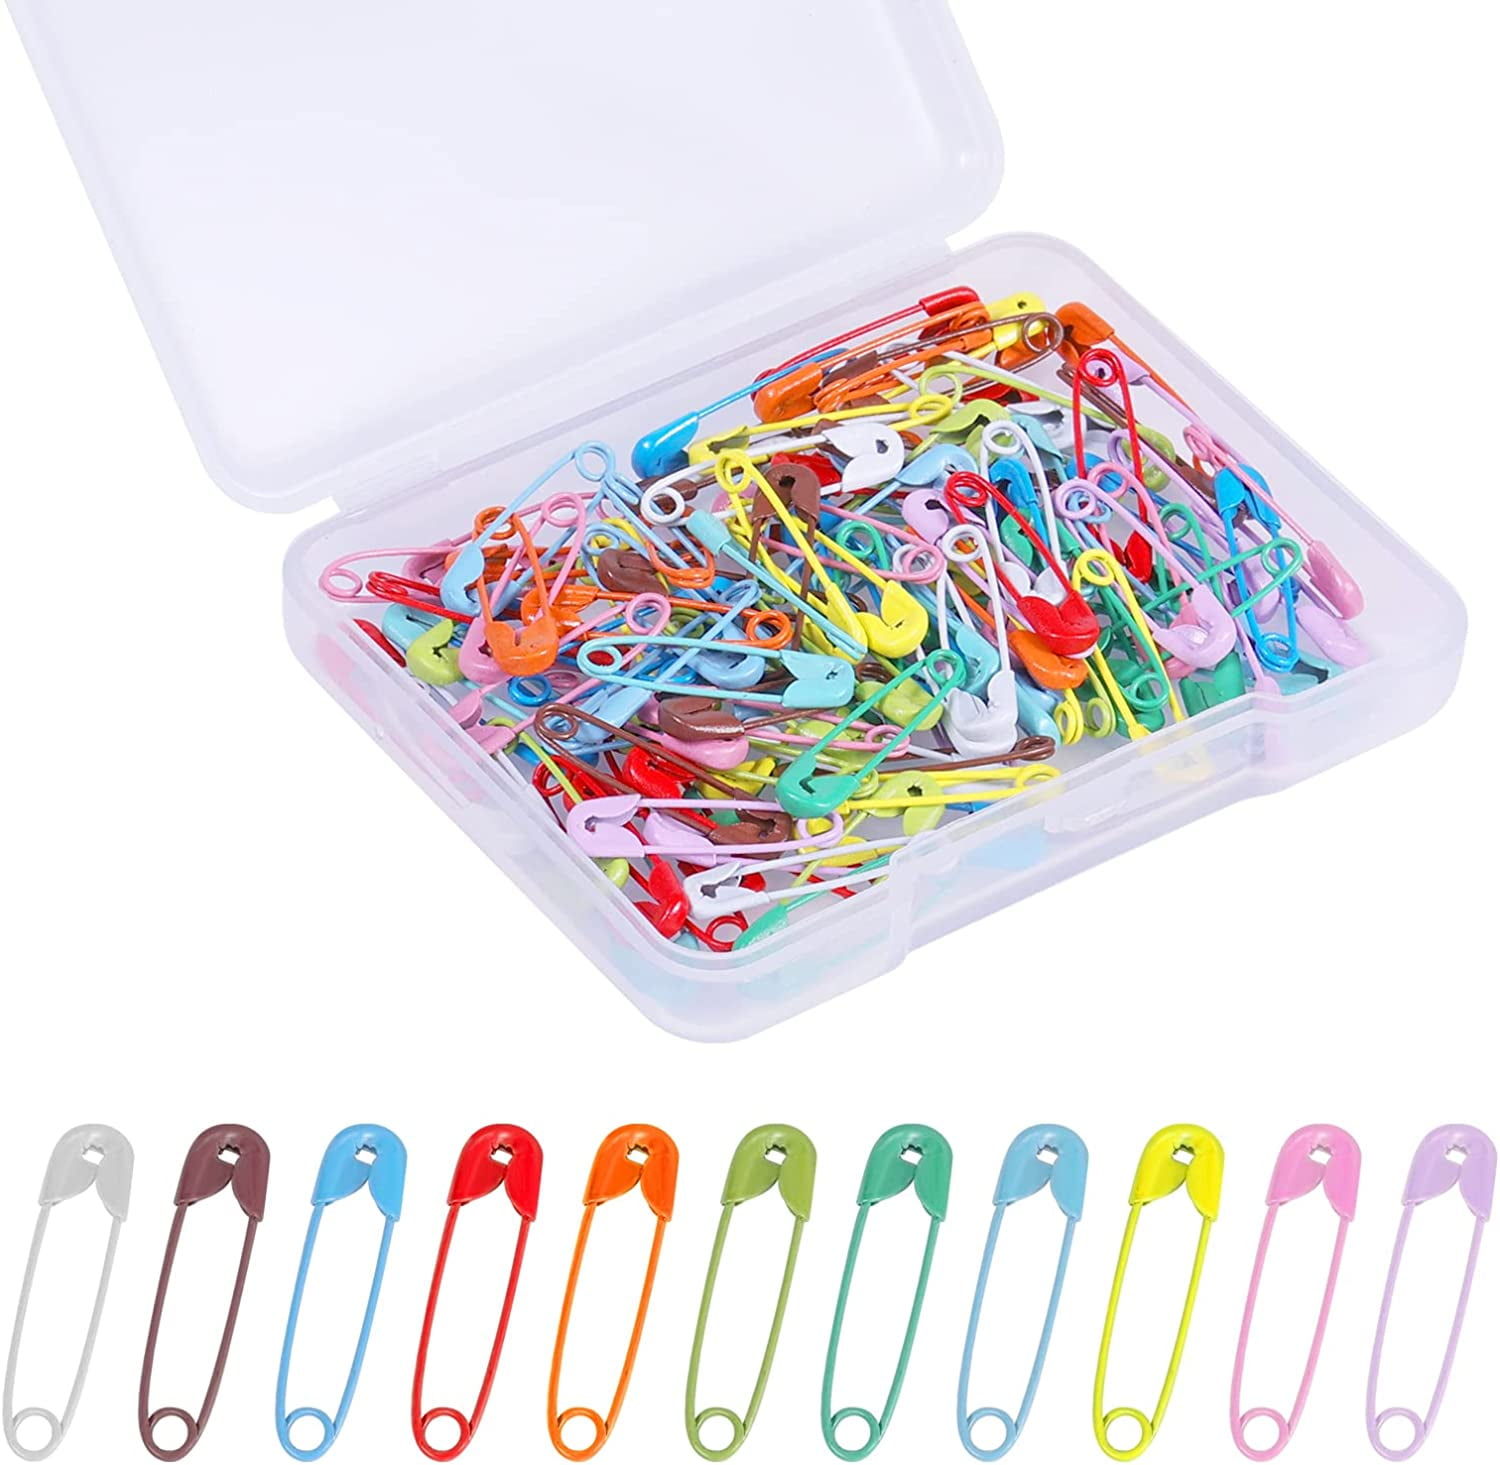 120PCS Mini Safety Pins, 19mm Colored Safety Assorted Pins for Art Crafts  Sewing, Clothing Accessories, Jewelry Making